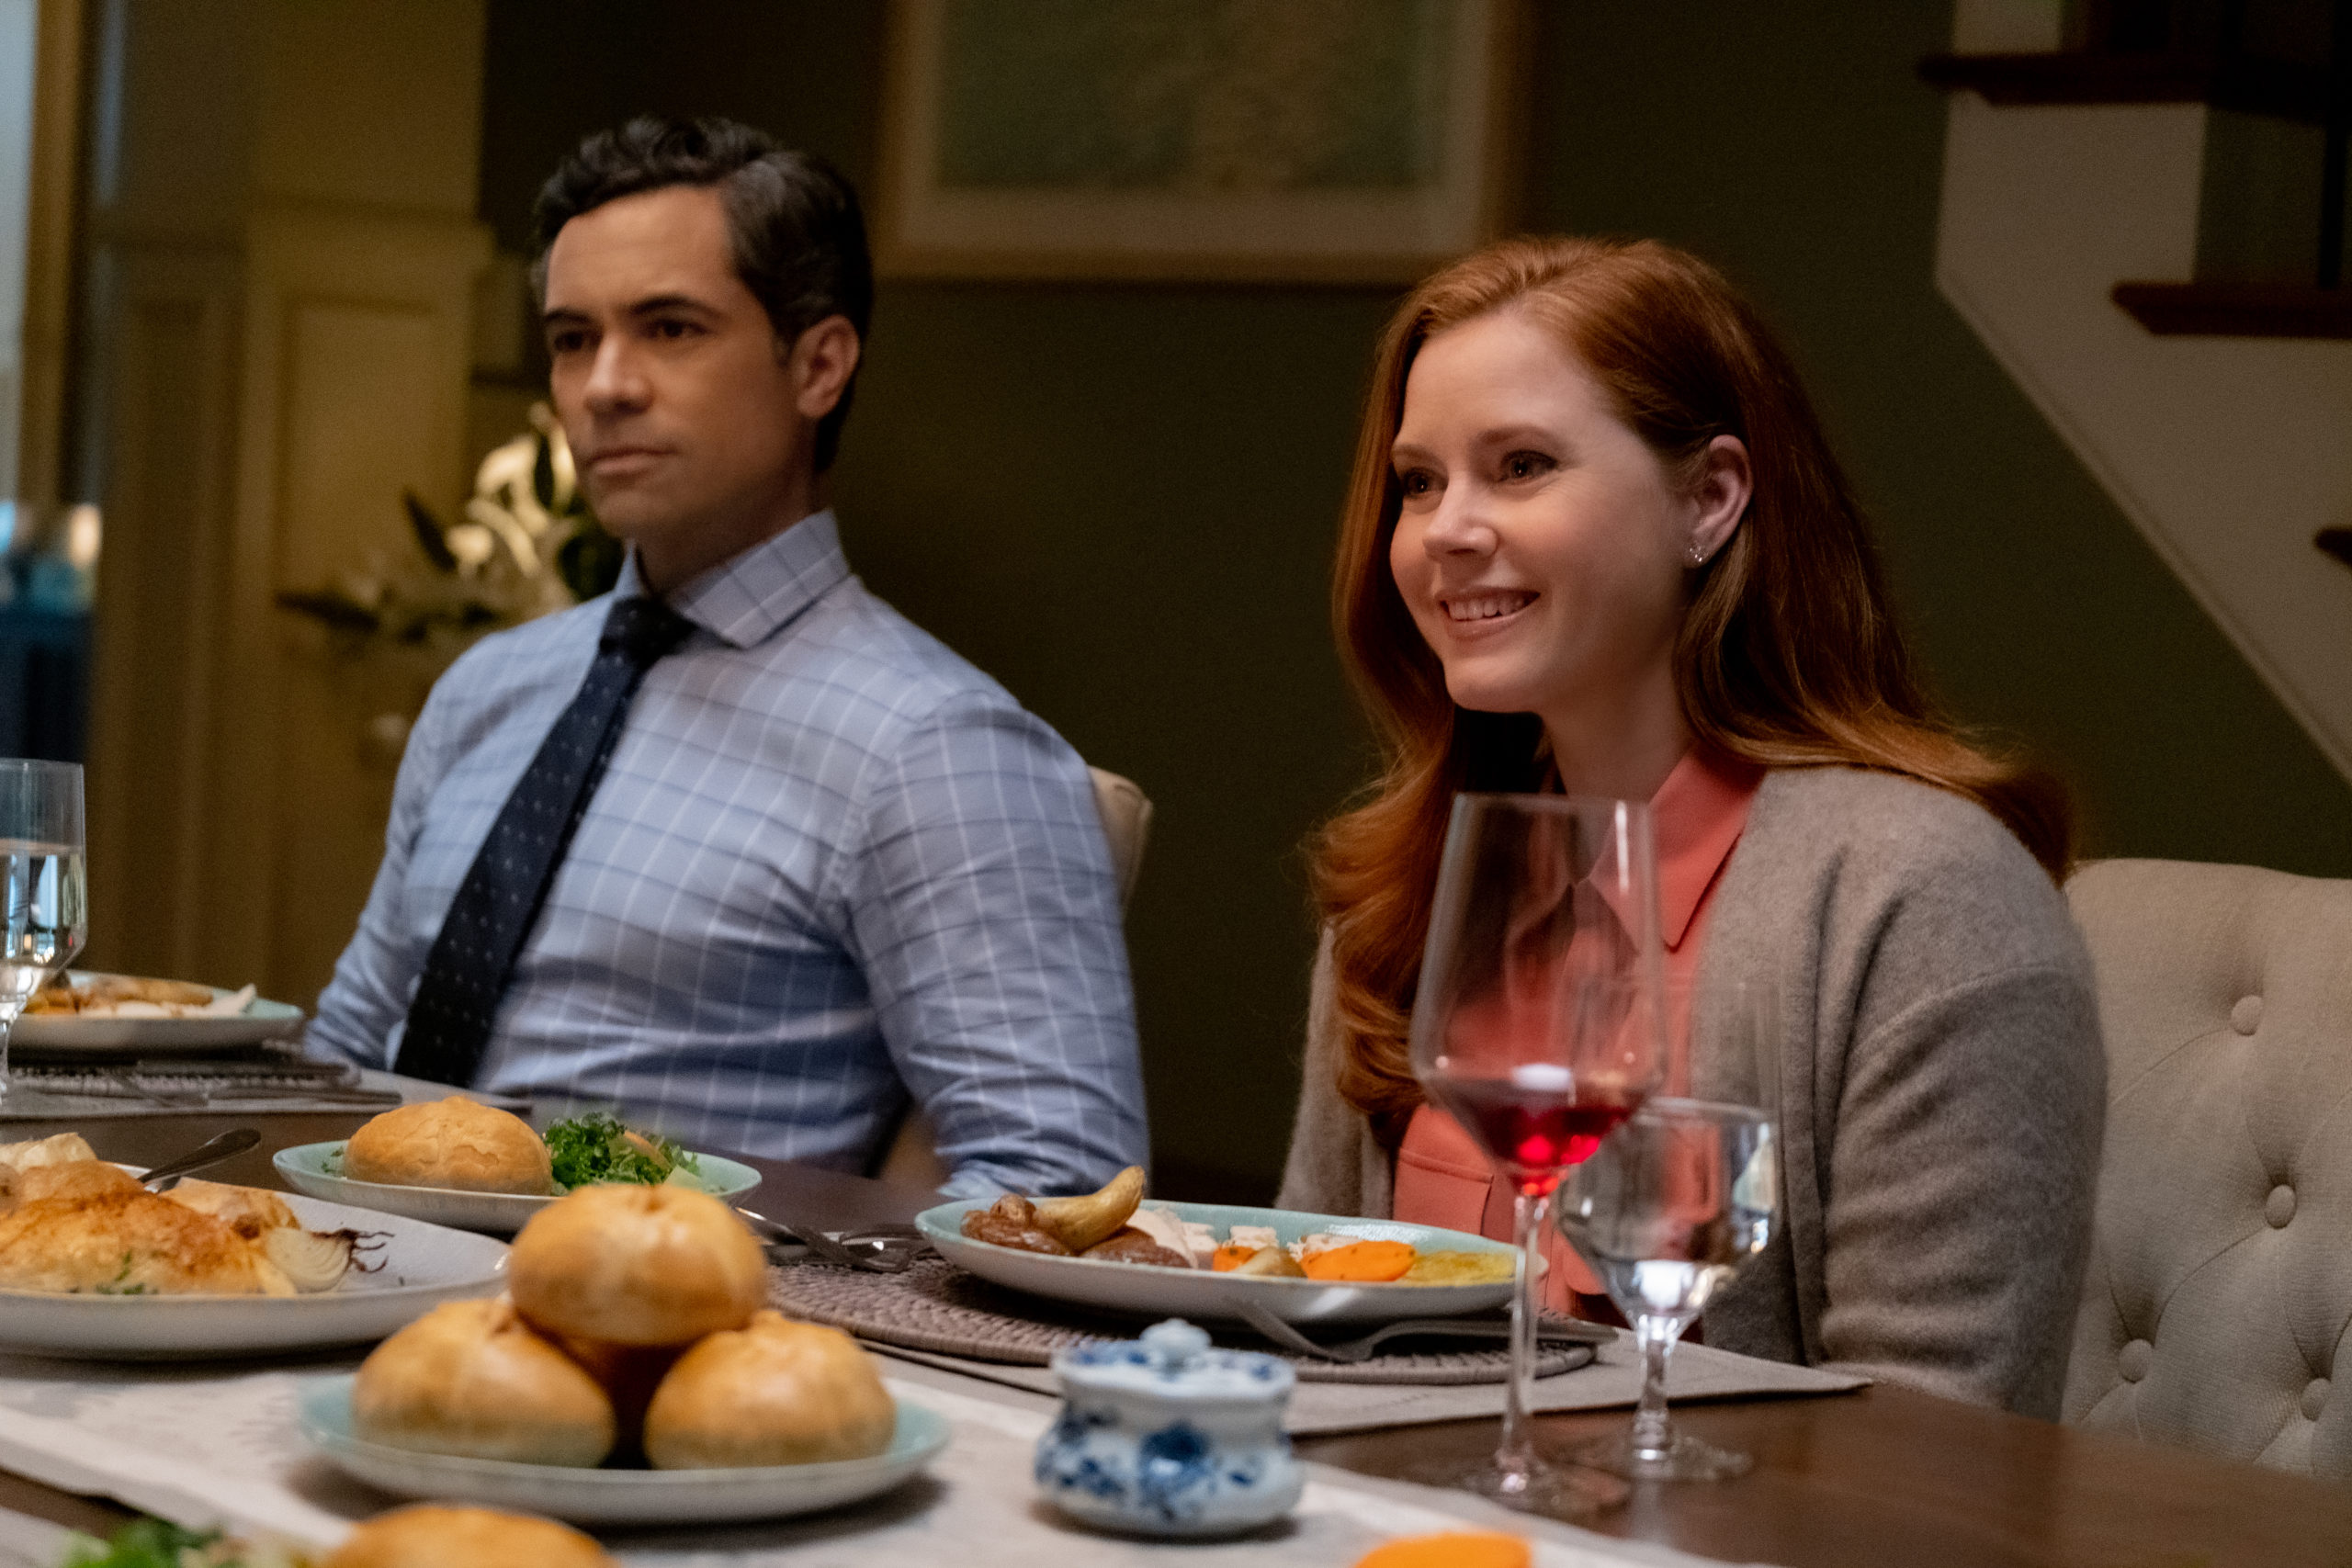 Dear Evan Hansen Star Danny Pino On Parenting And Communication [Exclusive Interview]